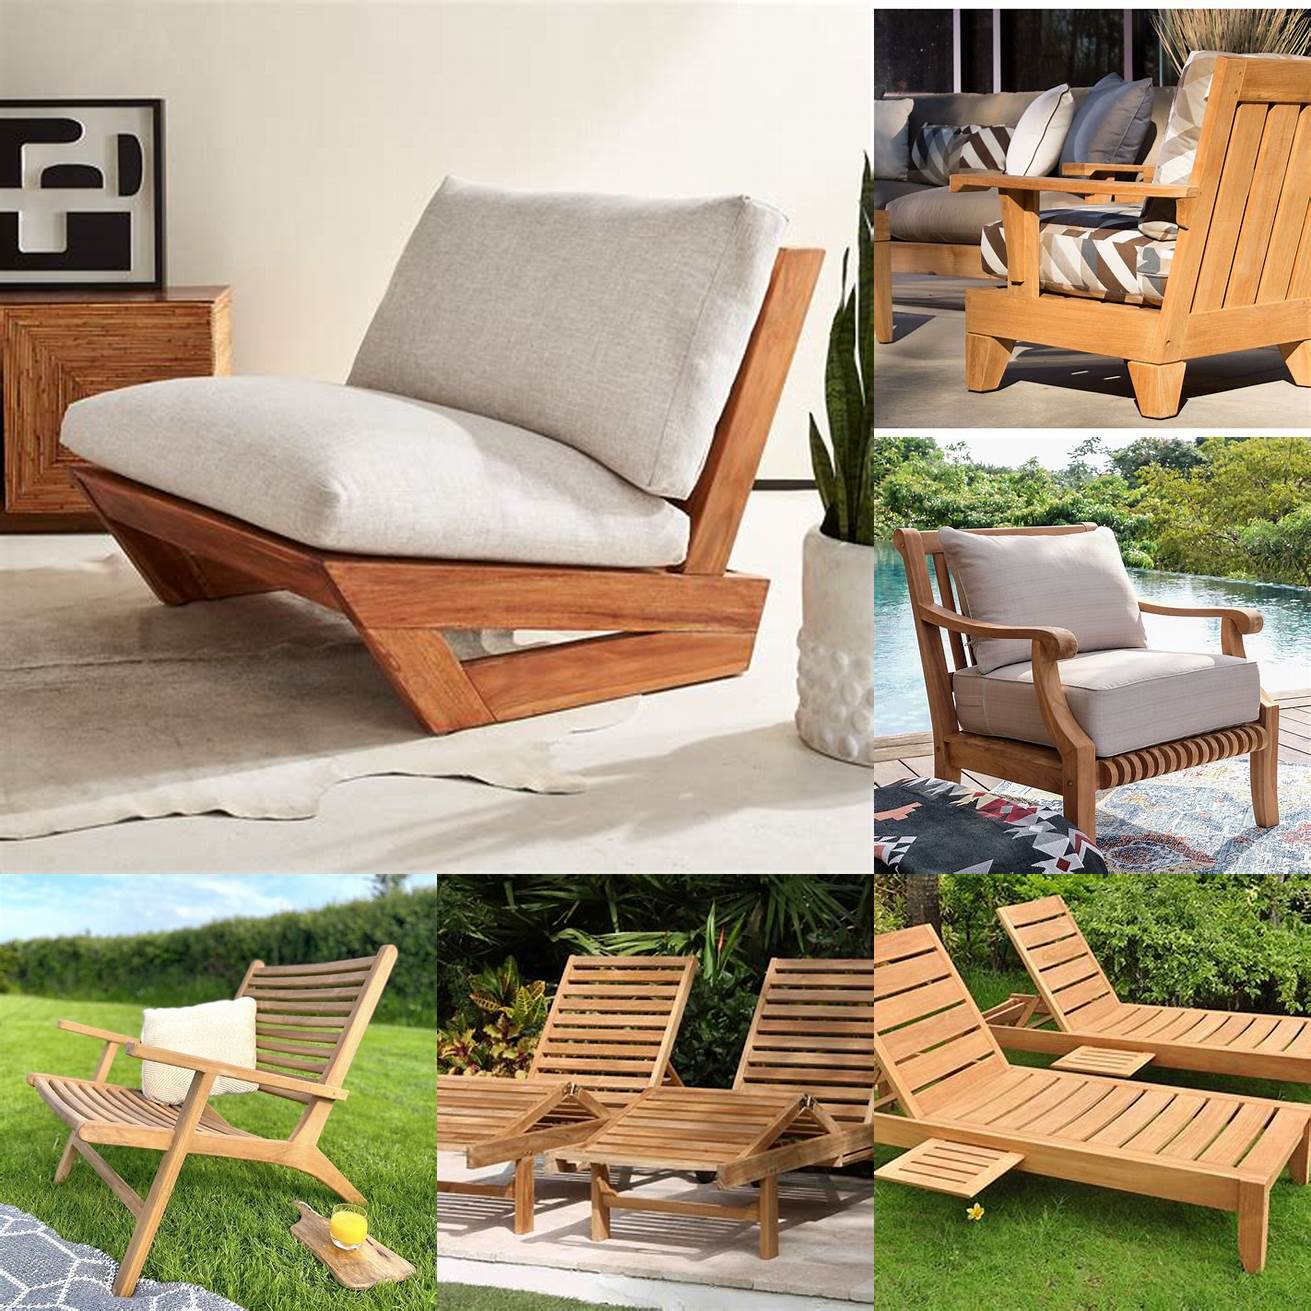 Sunset Teak Outdoor Lounge Chair with a Book